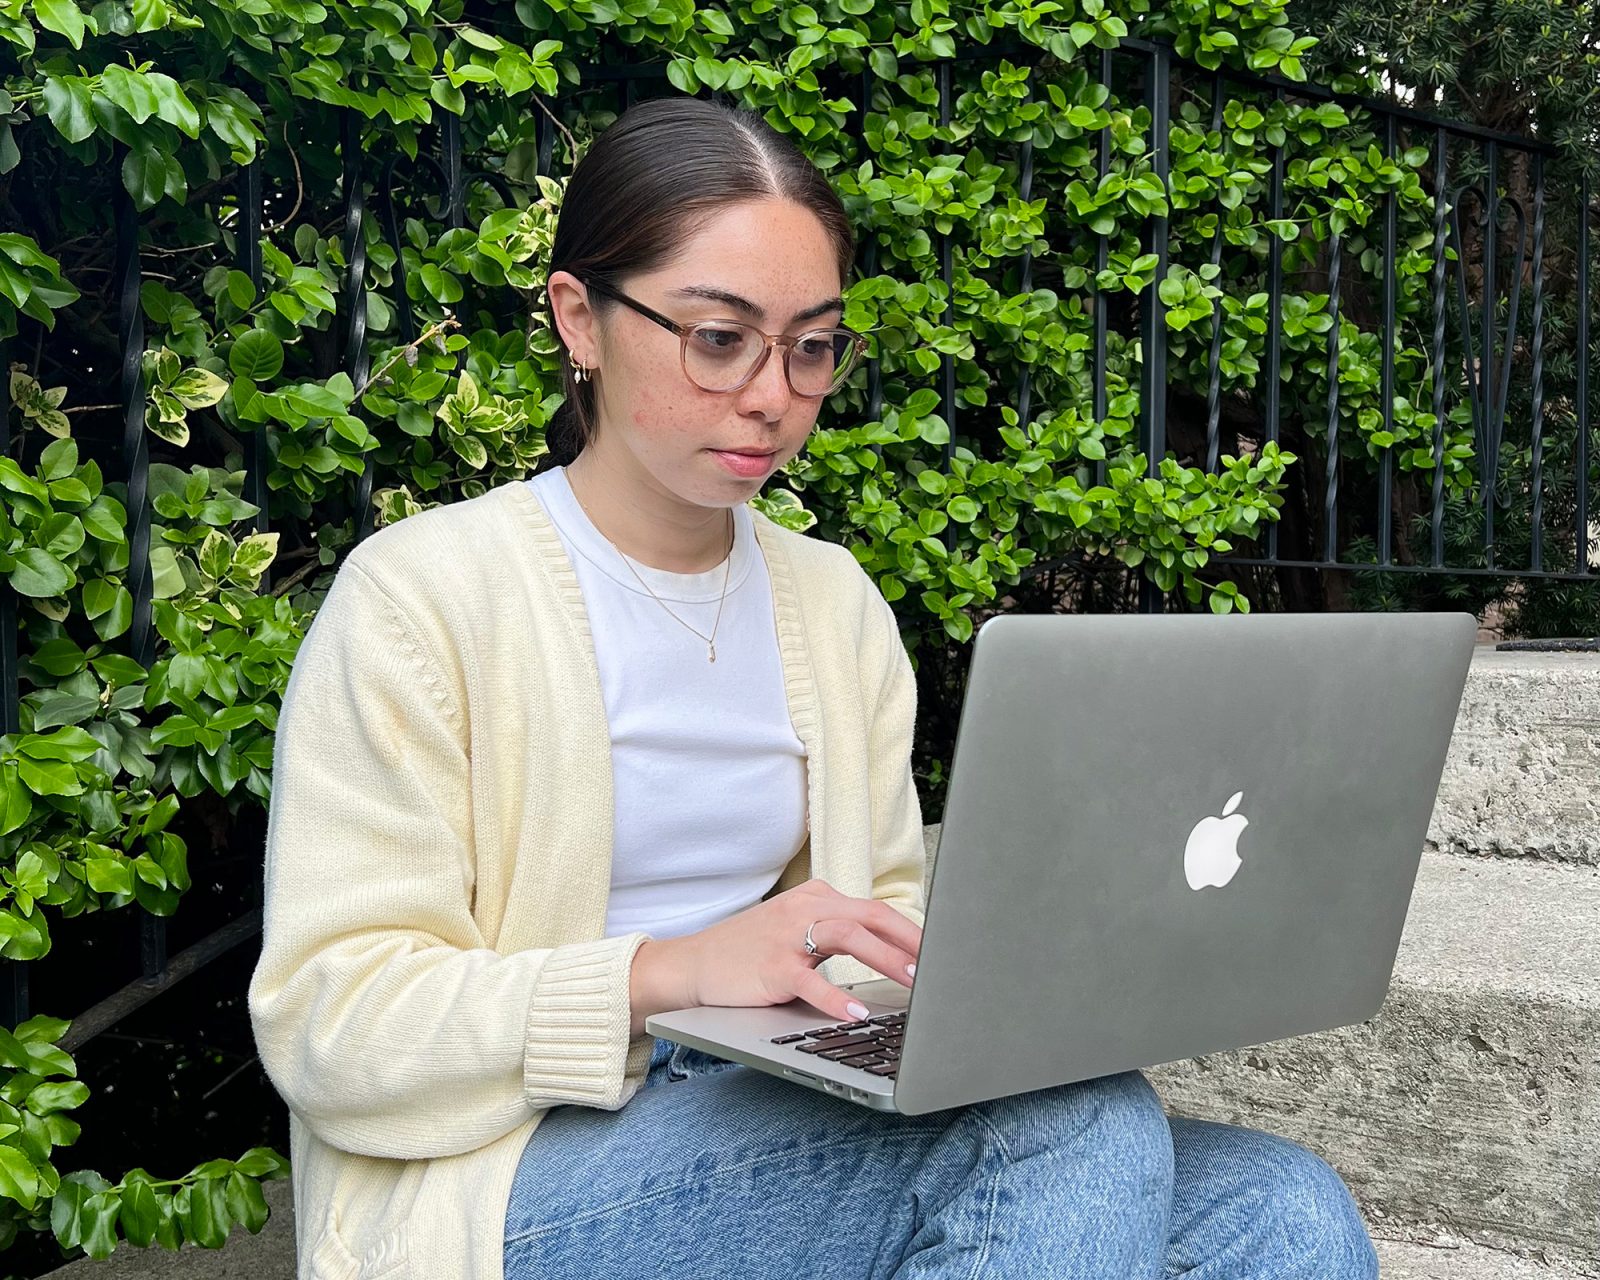 Brittany Giles sits on outdoor steps with a laptop computer on her lap.